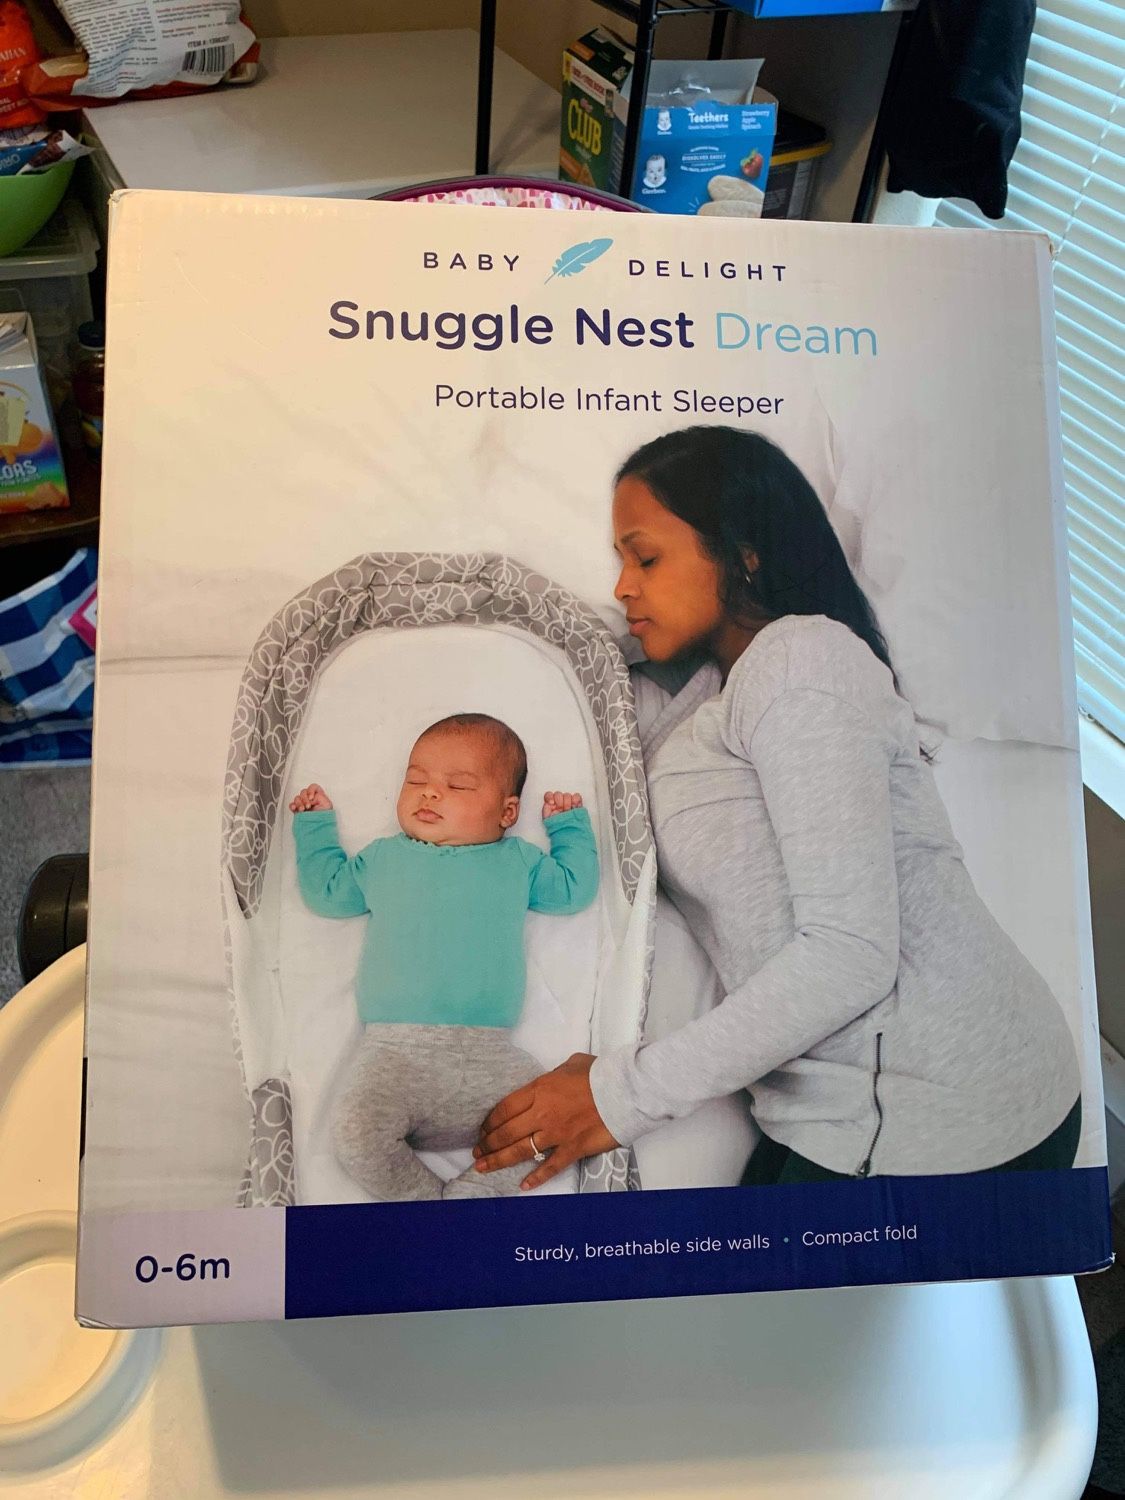 Baby Delight Snuggle Nest